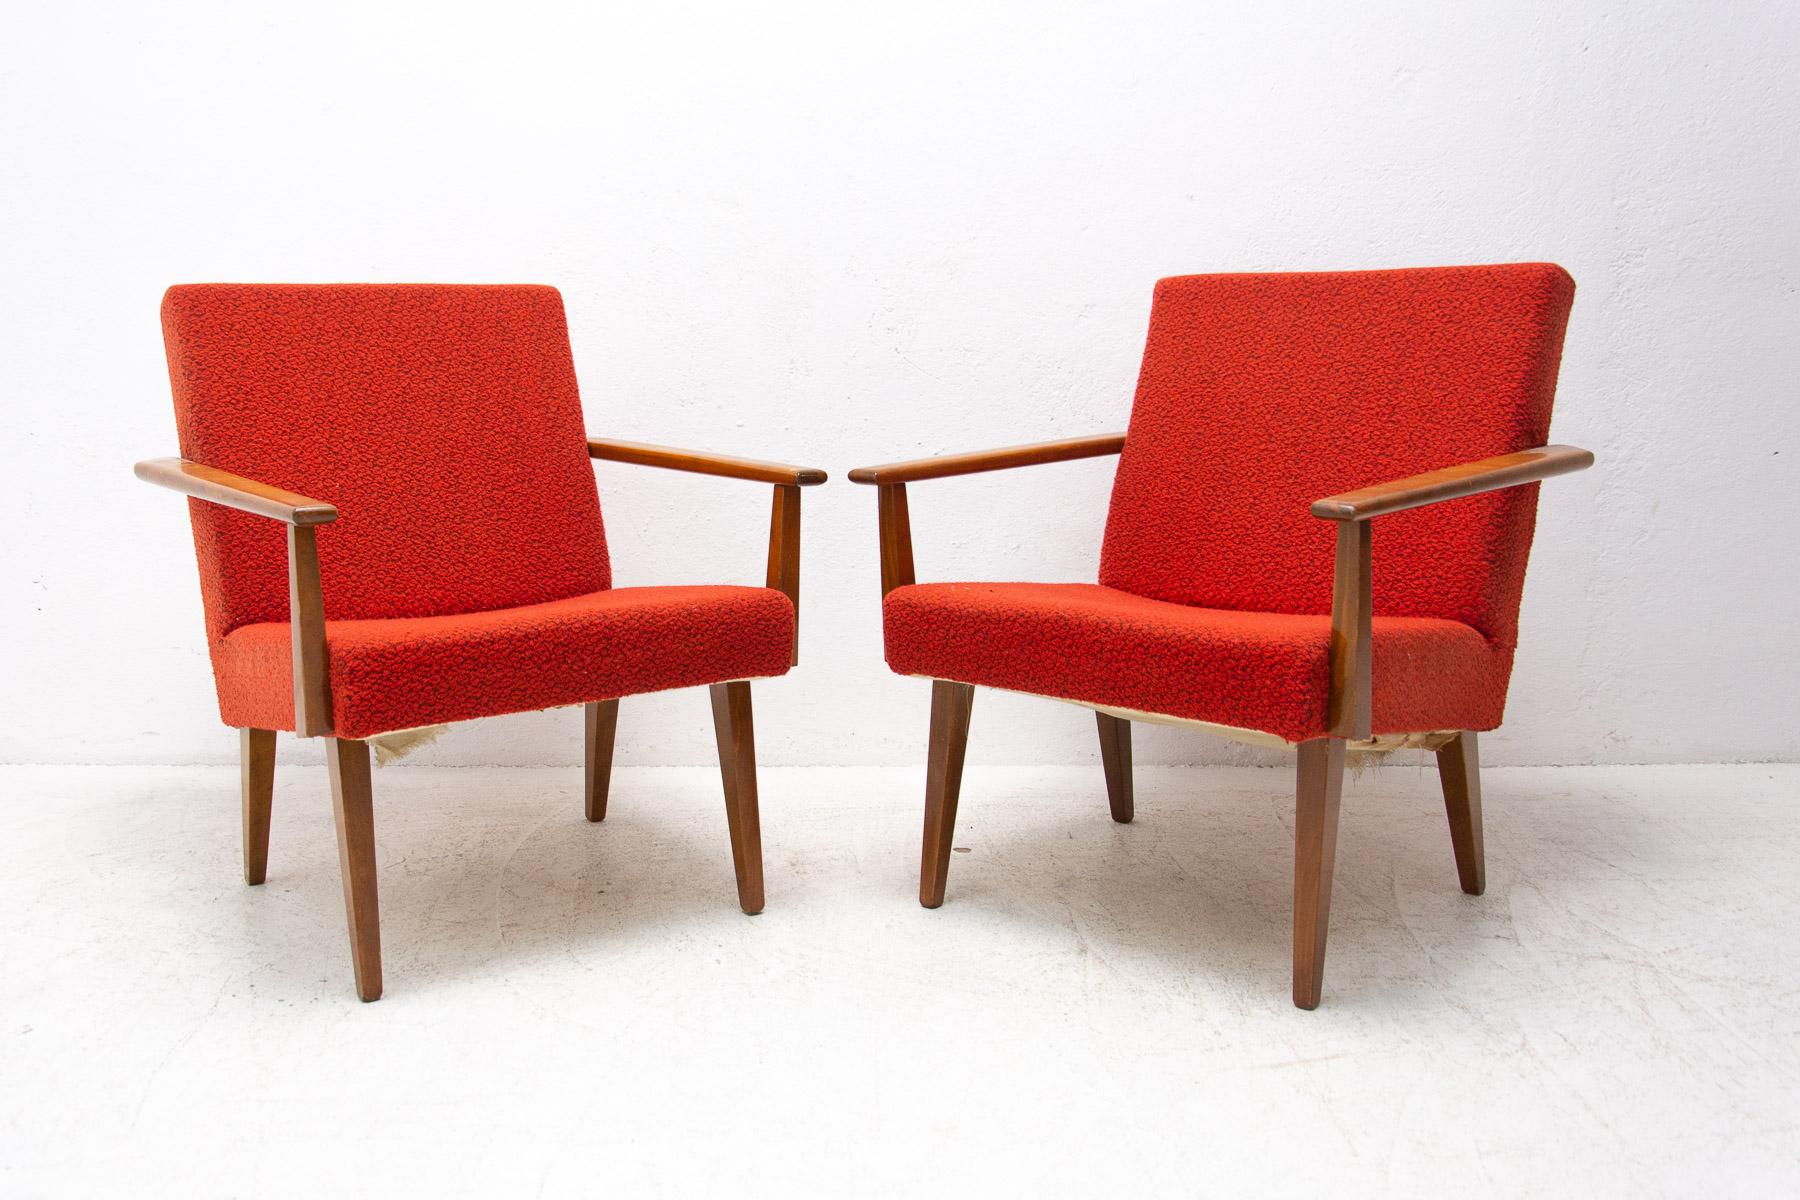 These Czechoslovak lounge chairs were made by Tatra Nabytok in the former Czechoslovakia in the 1960´s. Attribute to František Jirák.
The armchairs have an original beech wood structure. They are in good Vintage condition, showing signs of age and